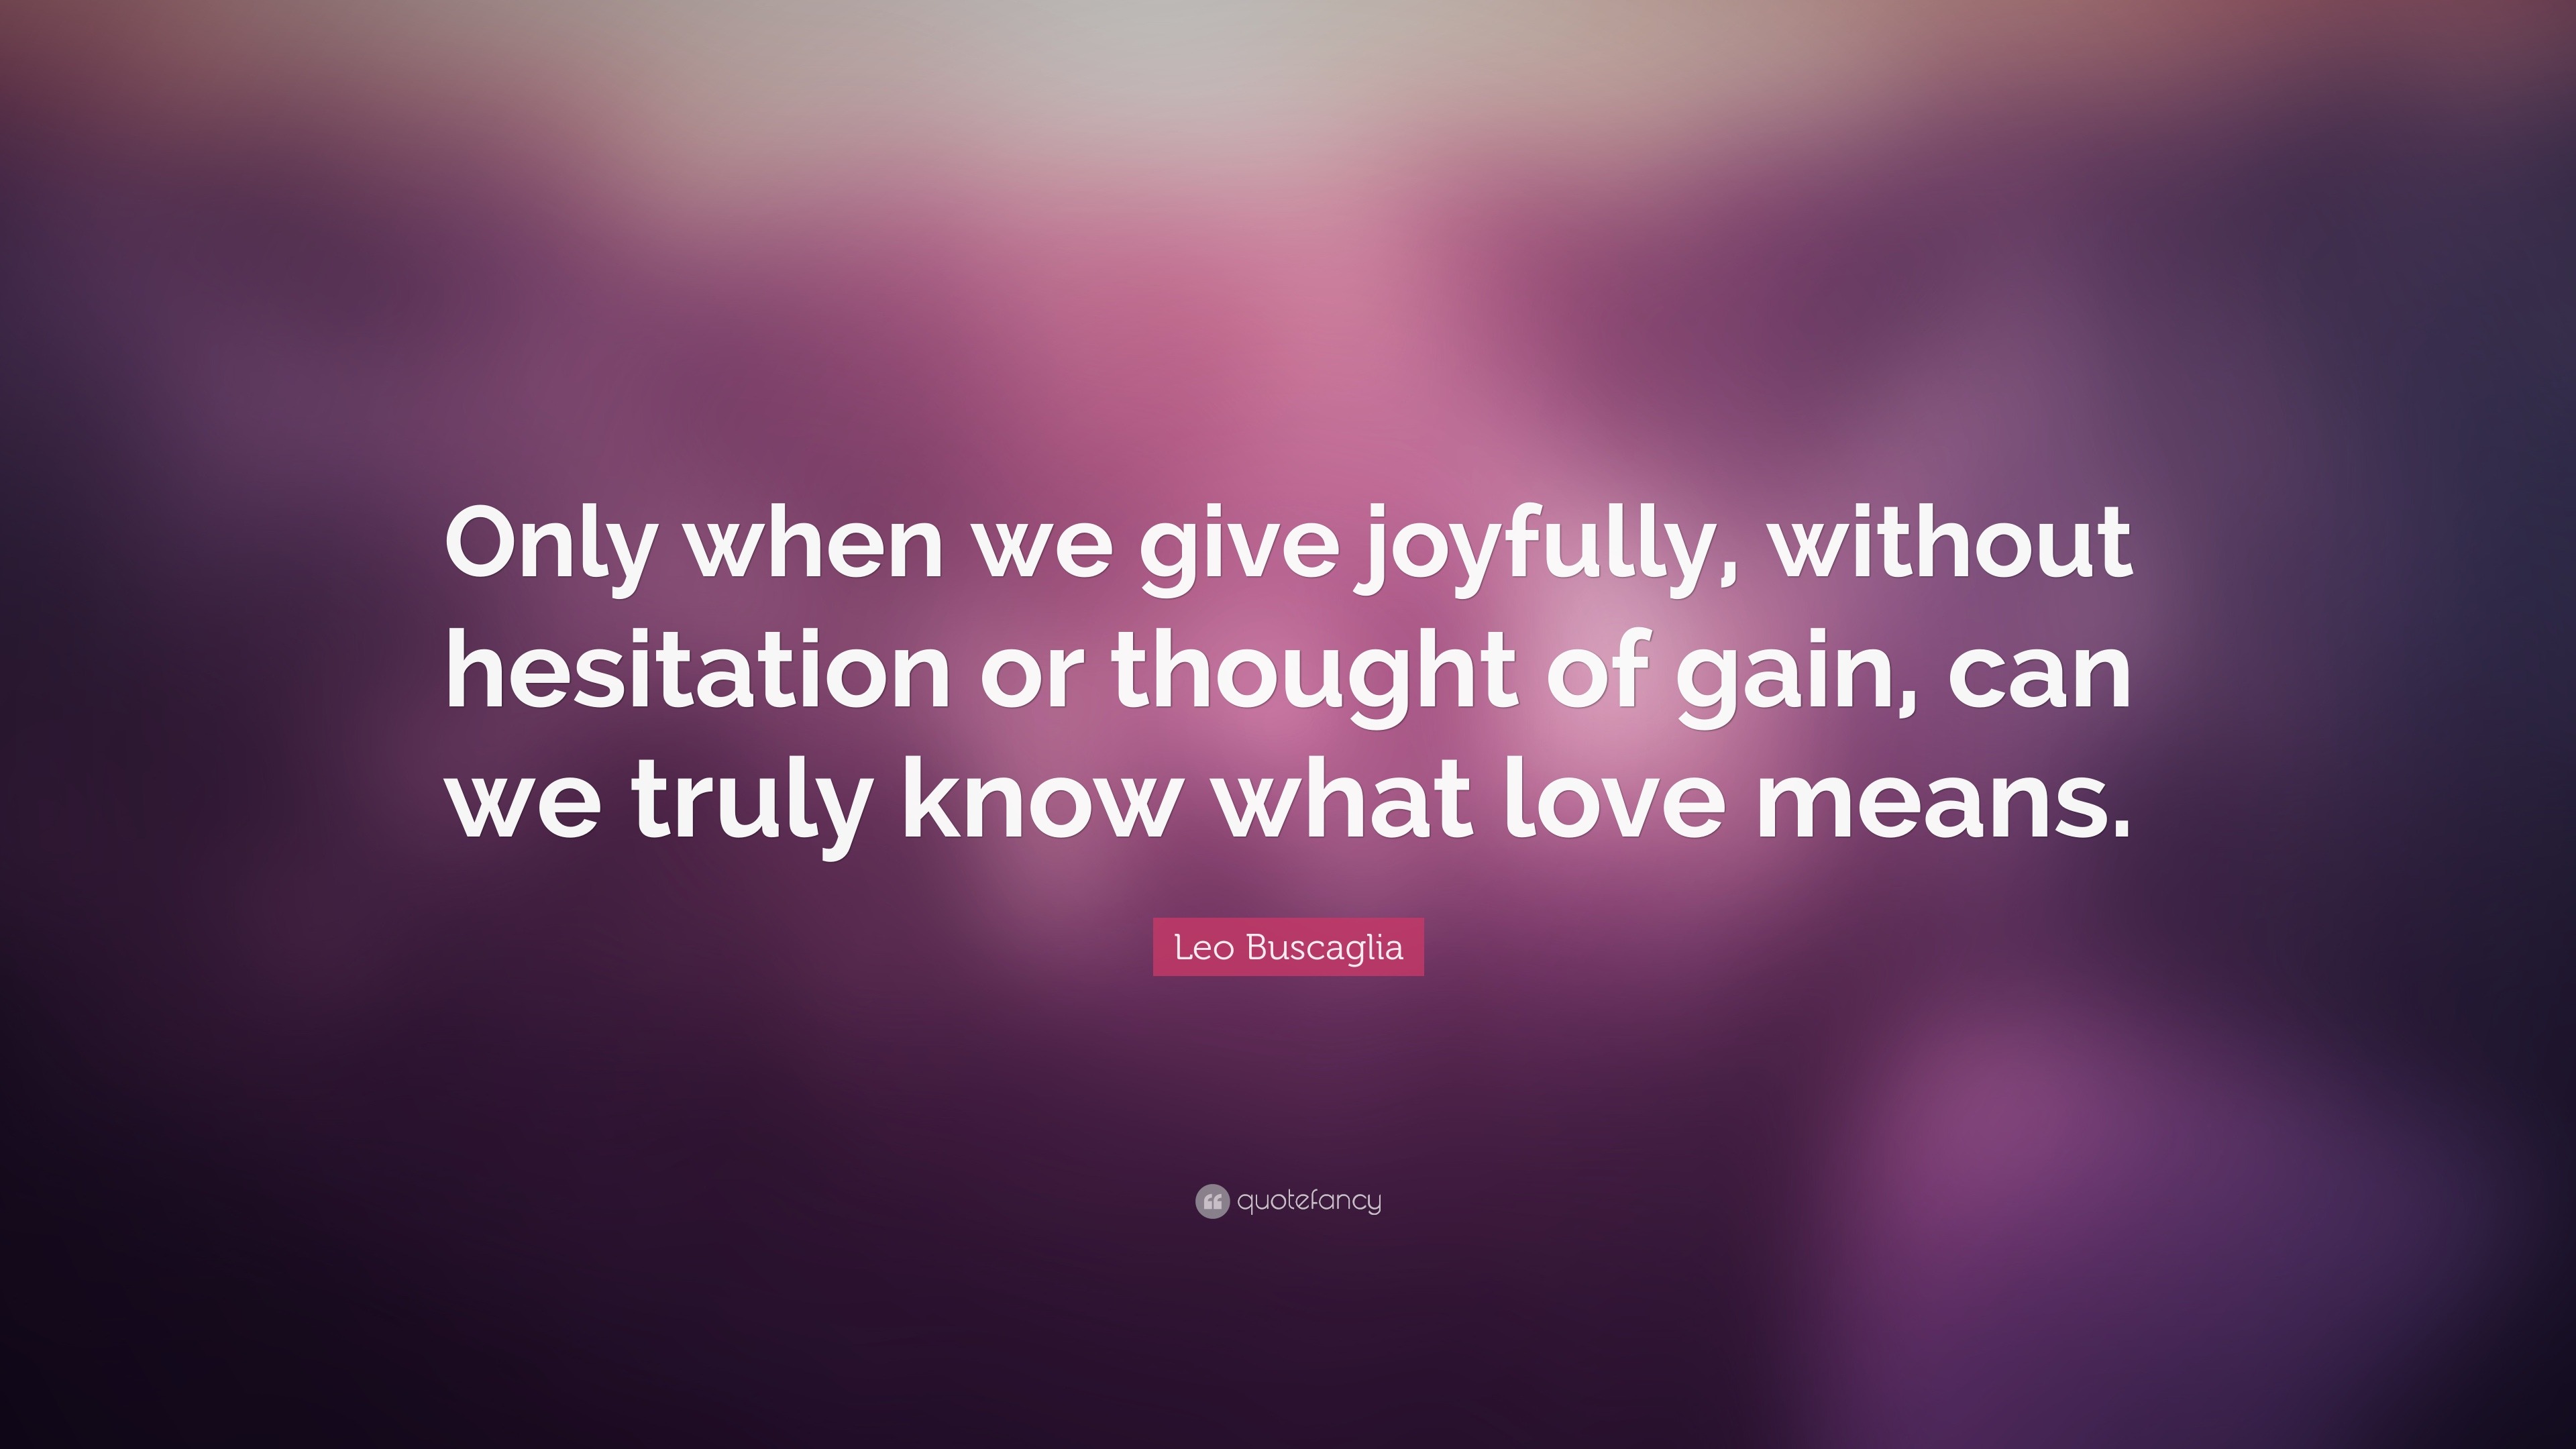 Leo Buscaglia Quote: “Only when we give joyfully, without hesitation or ...